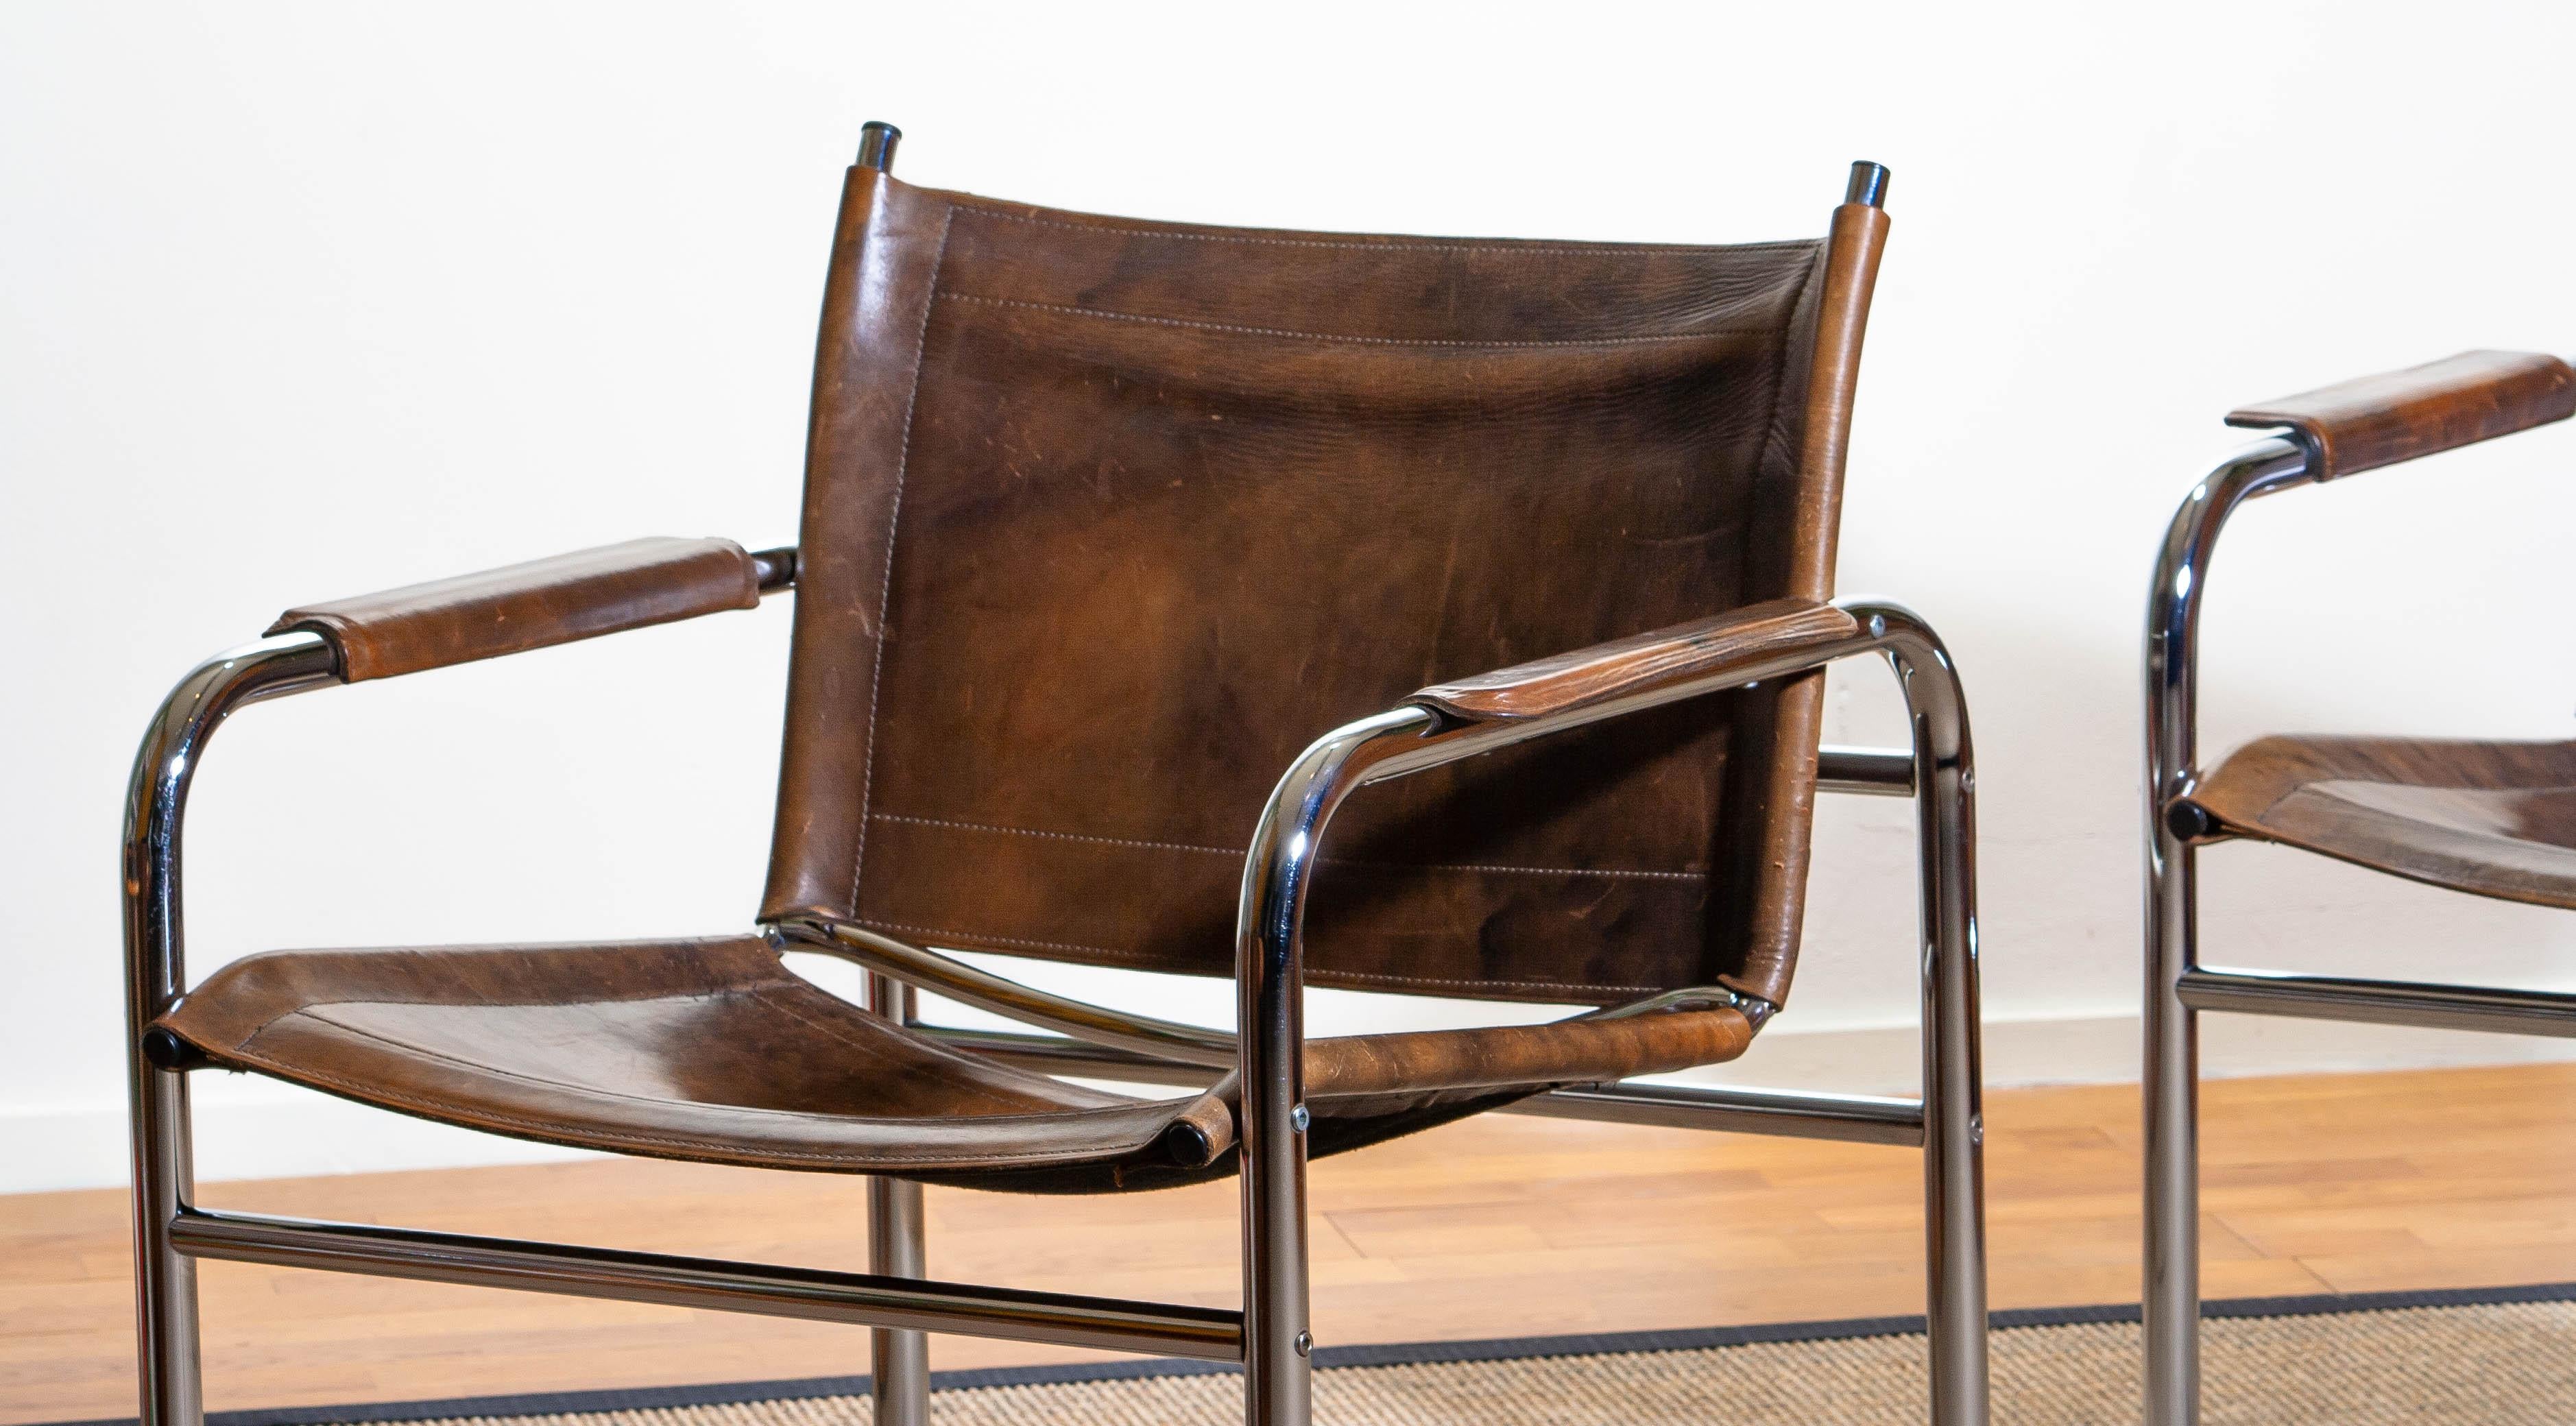 1980s, Pair of Leather and Tubular Steel Armchairs by Tord Bjorklund, Sweden 2